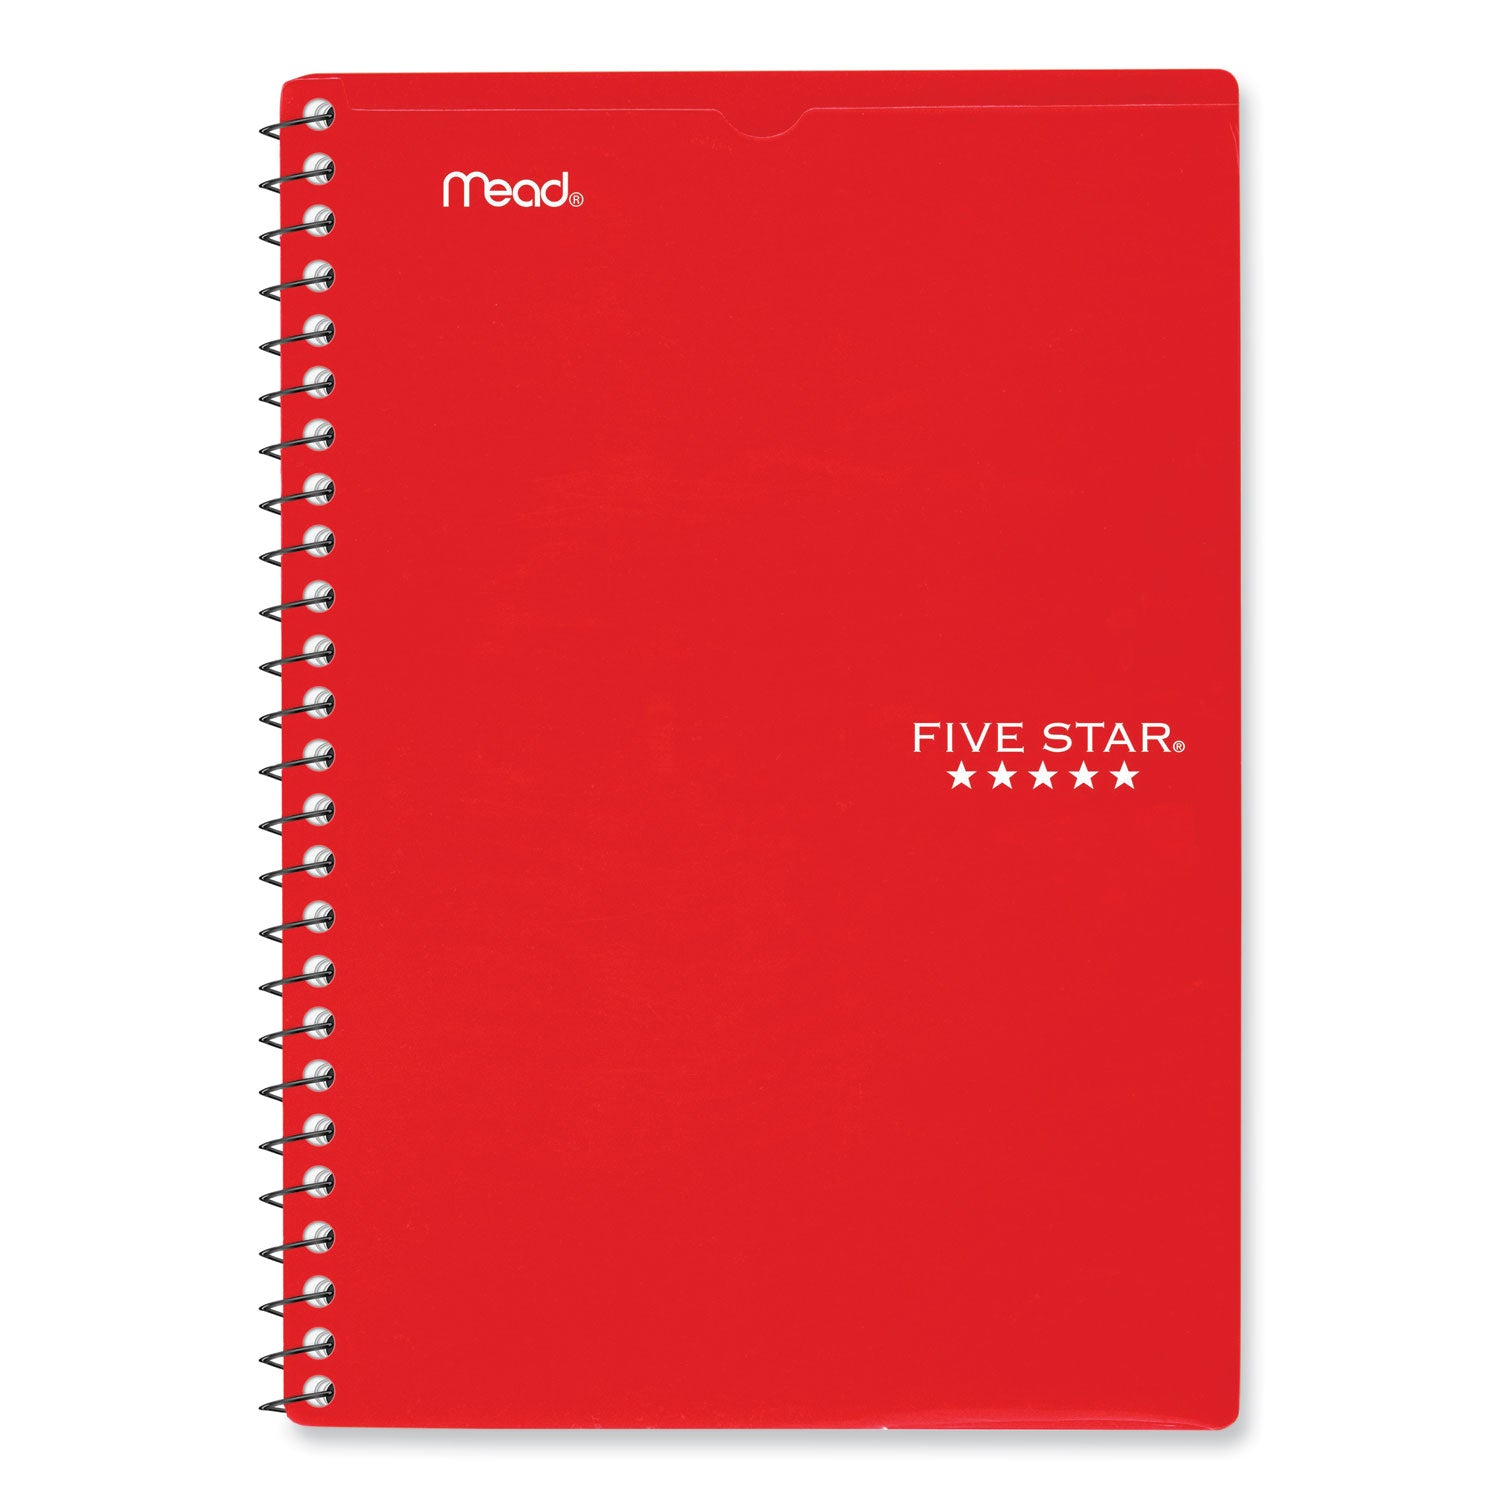 academic-year-weekly-monthly-planner-85-x-55-randomly-assorted-cover-colors-12-month-july-to-june-2022-to-2023_meacaw4510023 - 4